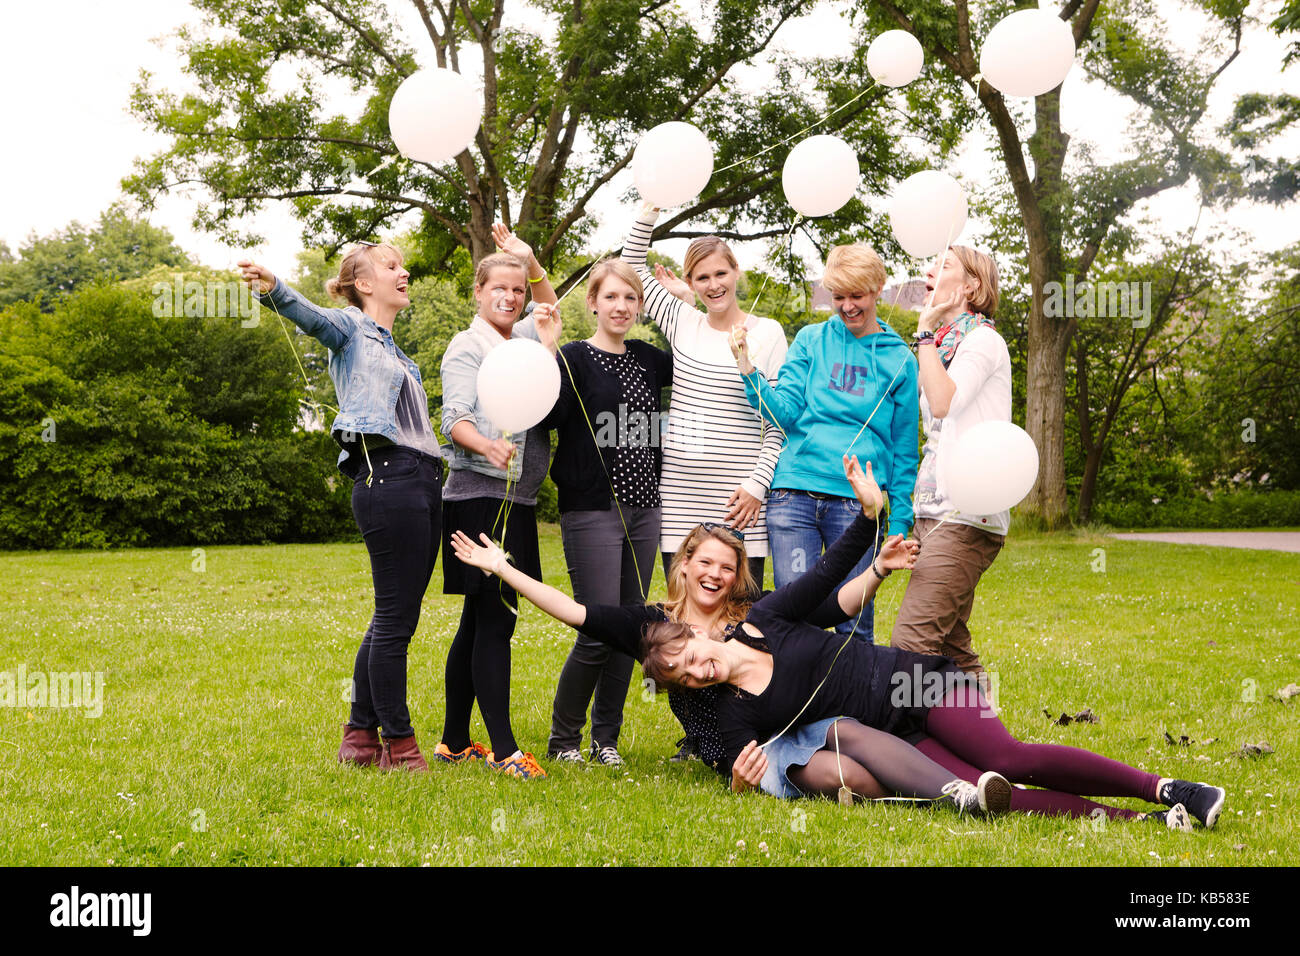 Girlfriends at a bachelorette party, group picture with balloons, Stock Photo